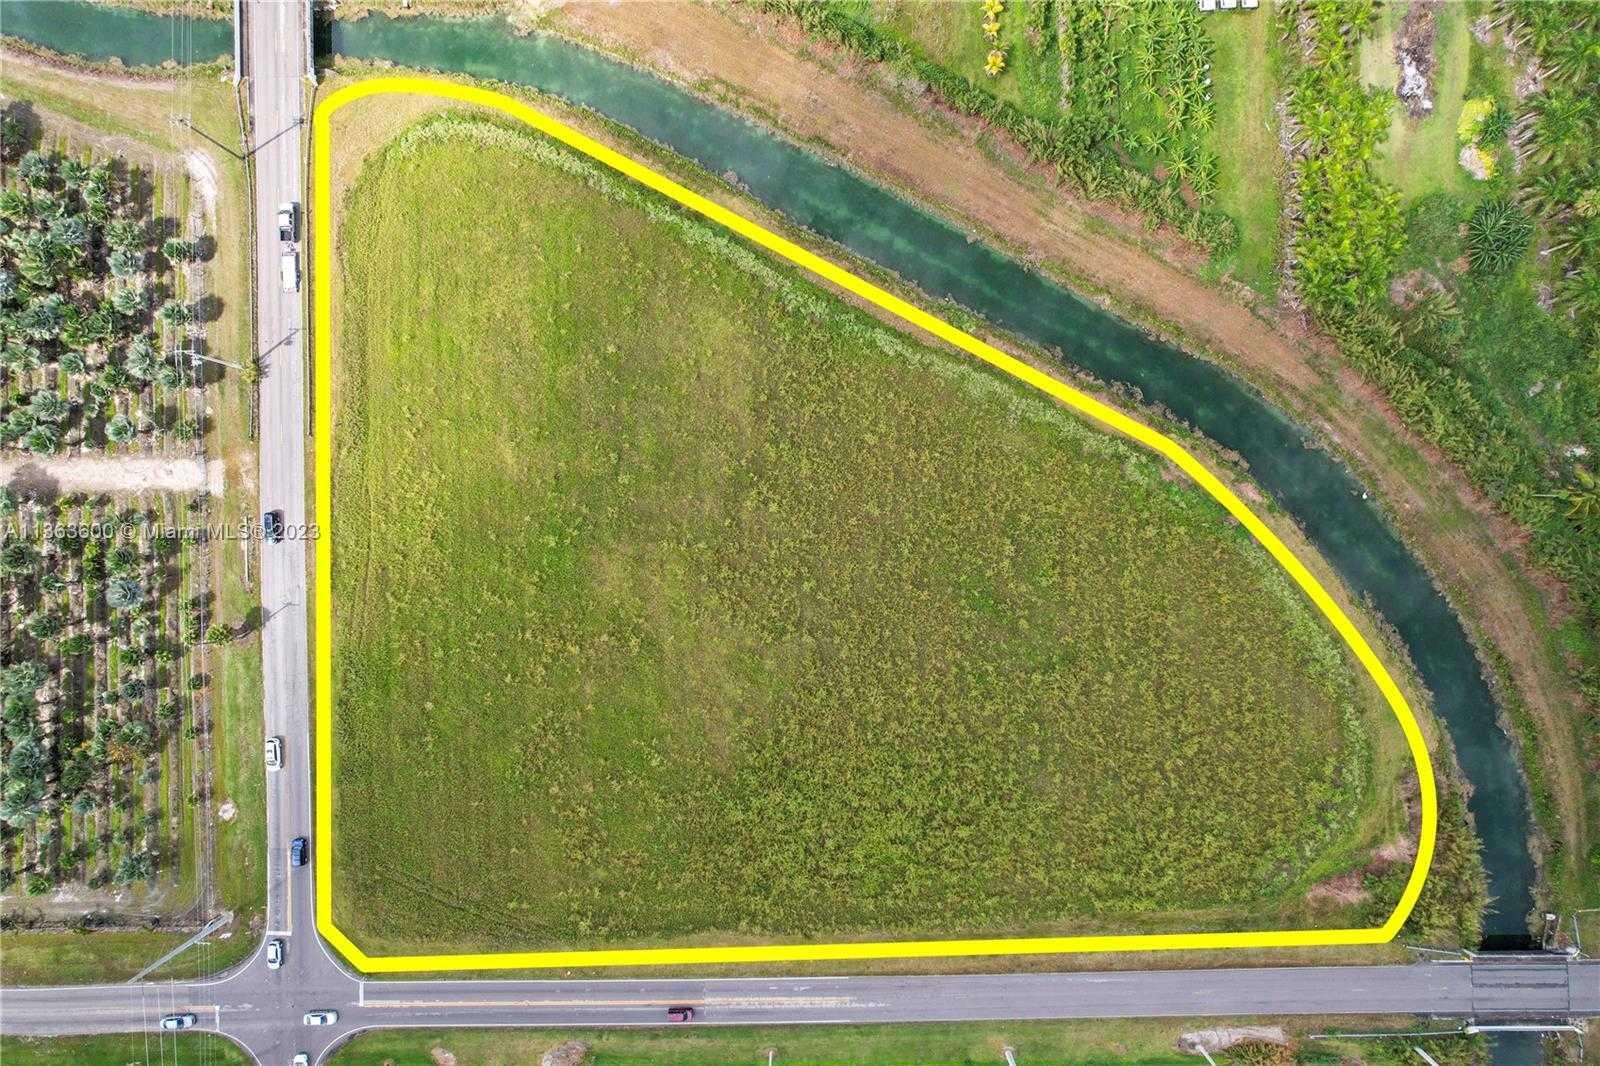 157 157XX 264 ST, Unincorporated Dade County, Commercial Land,  sold, Test Realtyworld broker